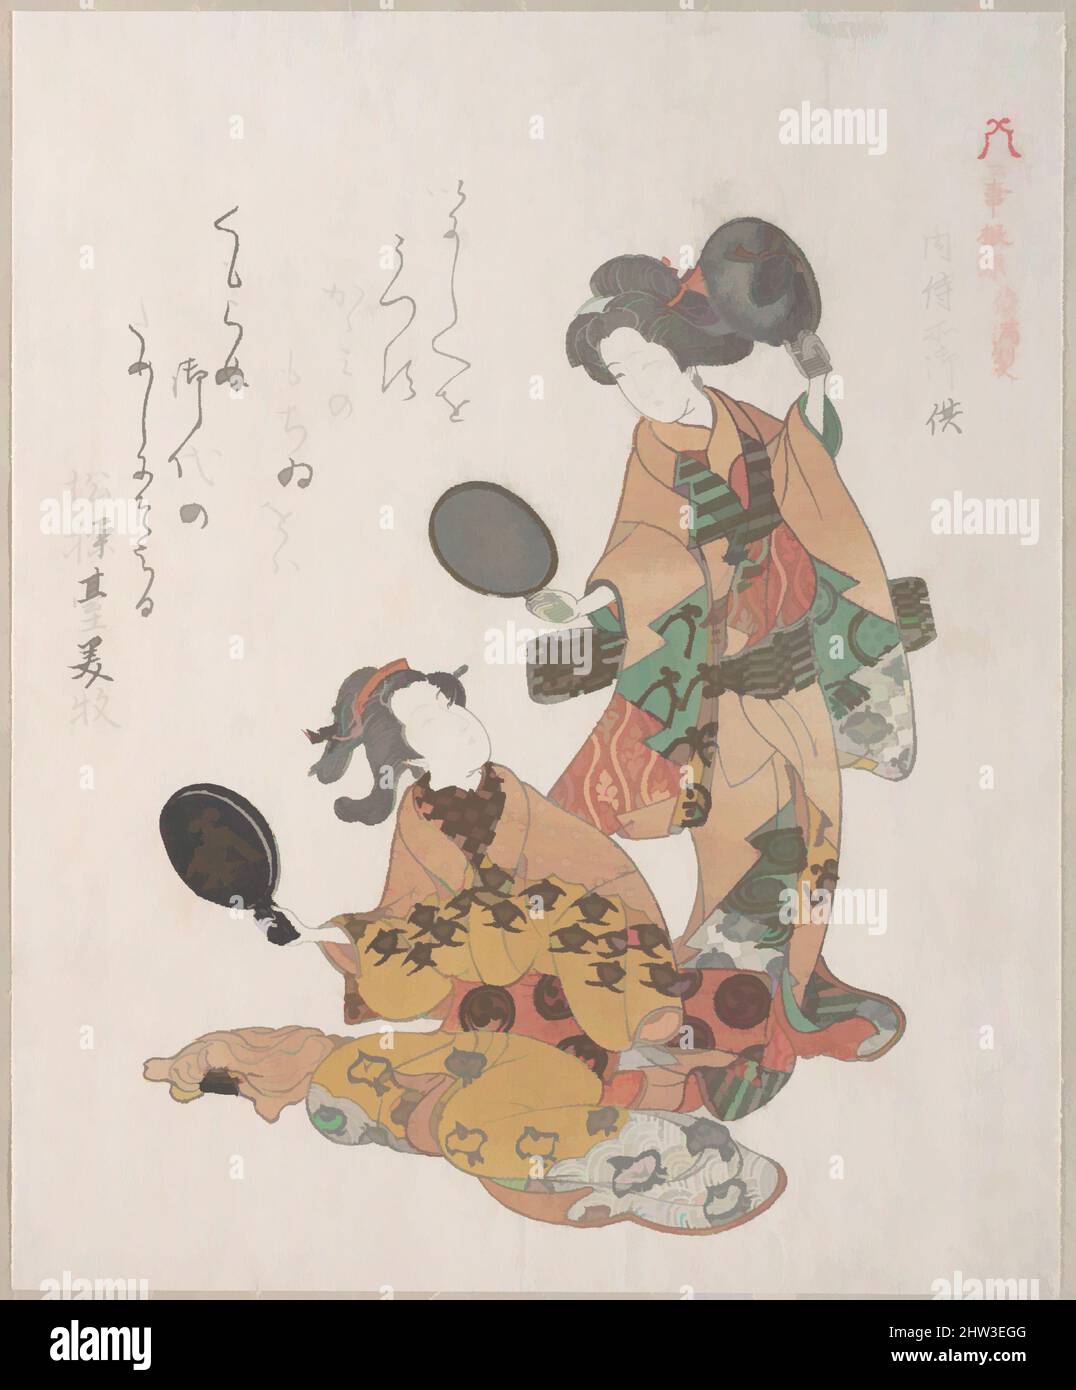 Art inspired by Two Women Looking in Mirrors, 19th century, Japan, Part of an album of woodblock prints (surimono); ink and color on paper, 8 1/8 x 6 5/8 in. (20.6 x 16.8 cm), Prints, Kubo Shunman (Japanese, 1757–1820), This composition is activated by a diagonal line formed by the, Classic works modernized by Artotop with a splash of modernity. Shapes, color and value, eye-catching visual impact on art. Emotions through freedom of artworks in a contemporary way. A timeless message pursuing a wildly creative new direction. Artists turning to the digital medium and creating the Artotop NFT Stock Photo